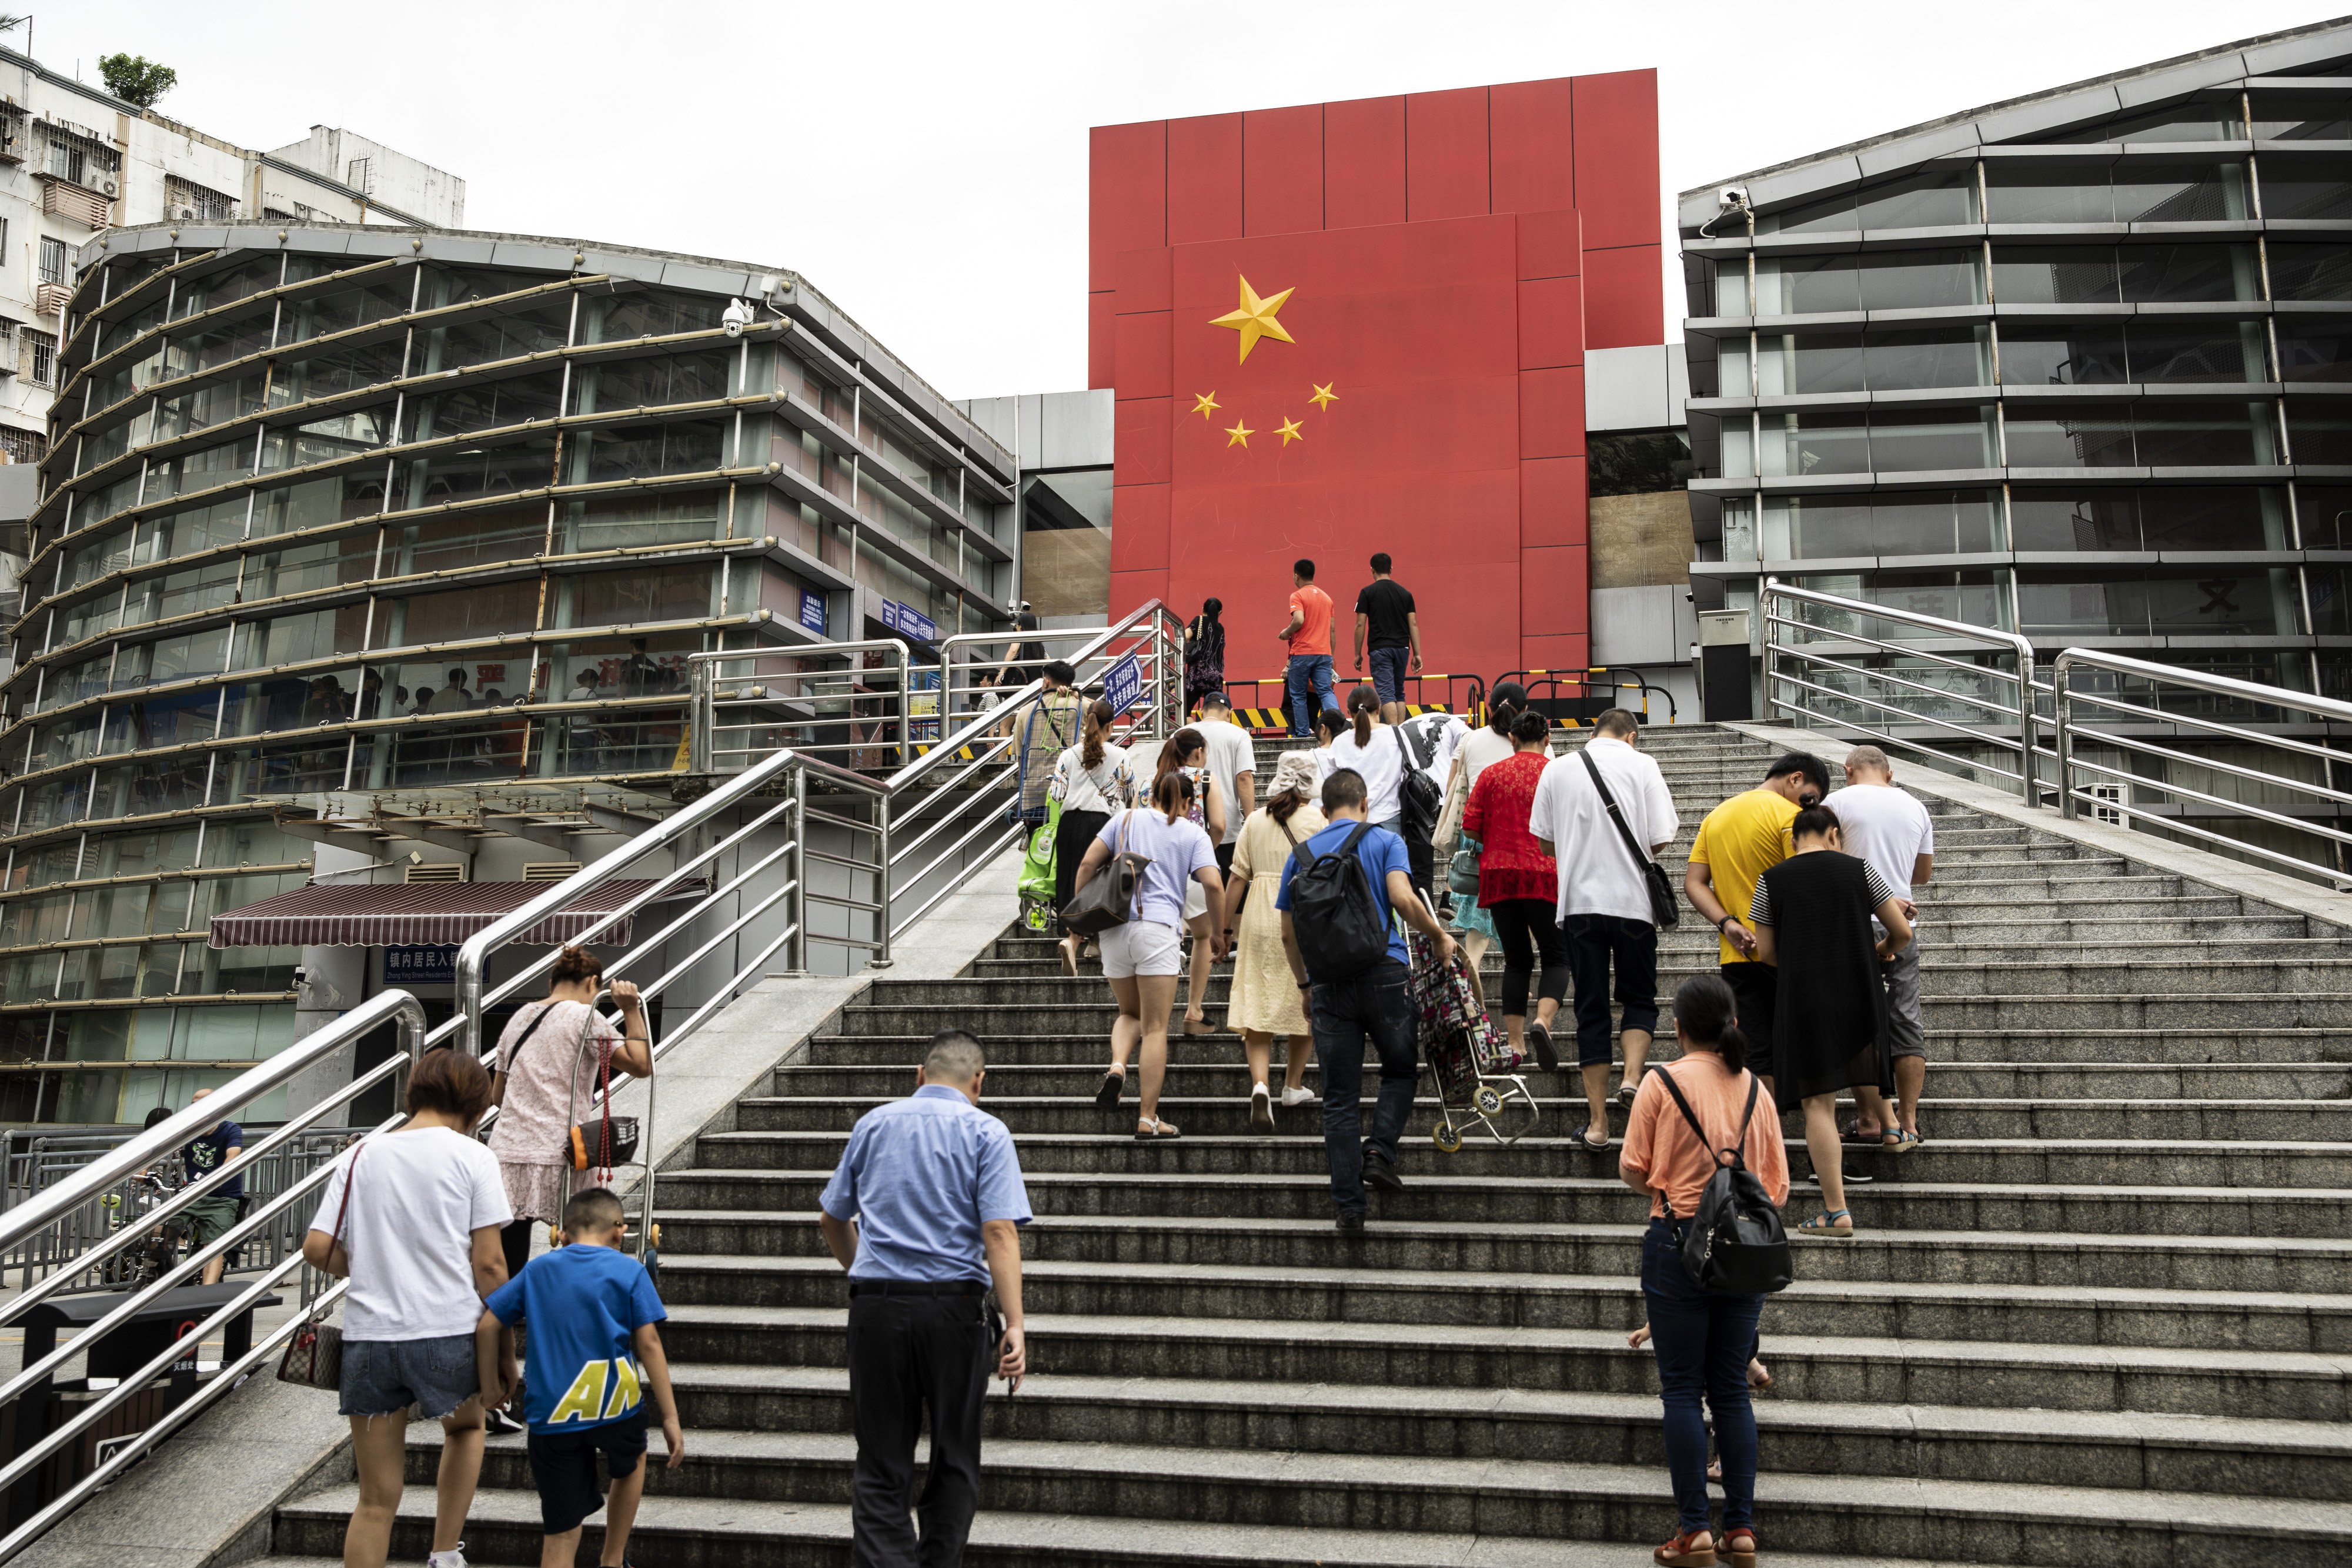 Experts say Shenzhen has a lot of growing and developing to do as it strives to be a world-class city, and Hong Kong may serve as a template. Photo: Bloomberg